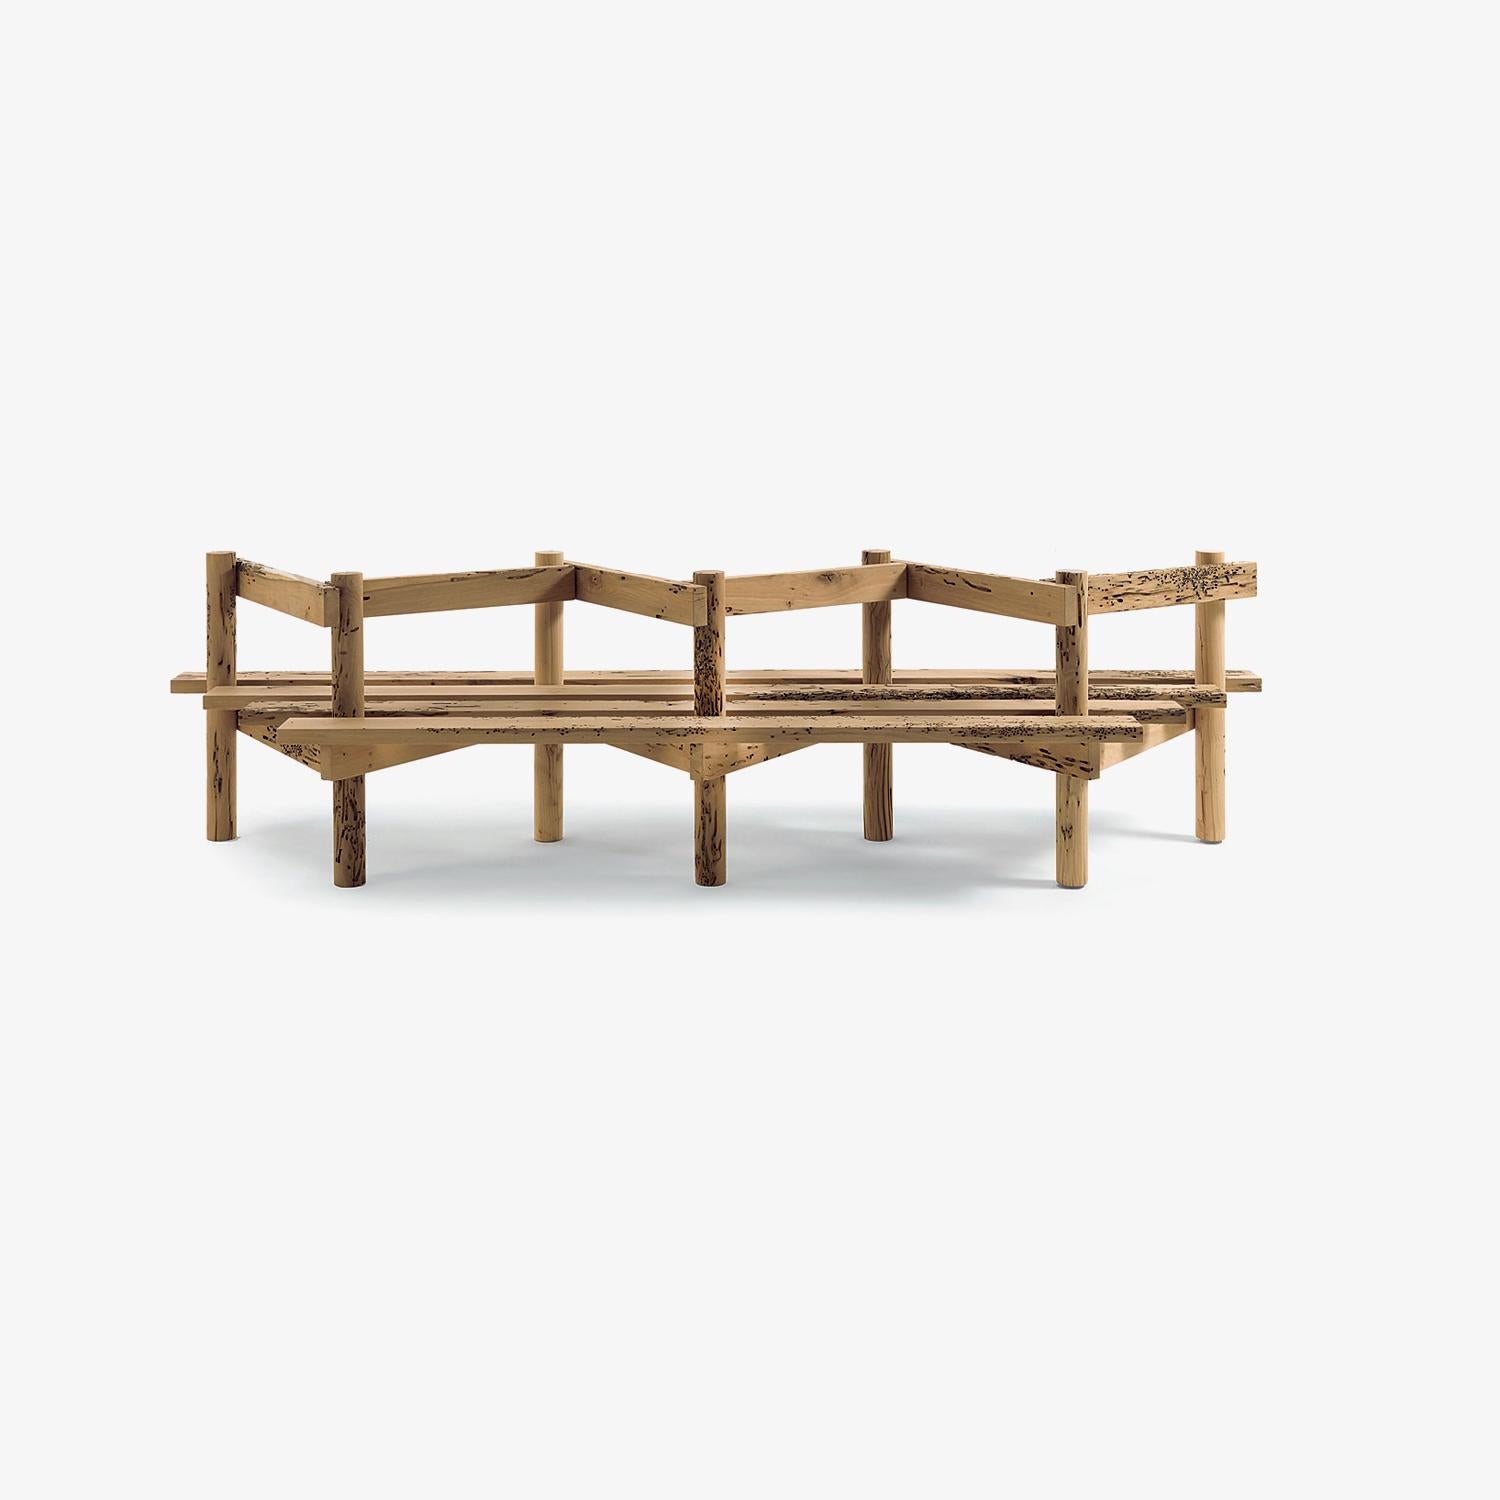 Italian Palizzata Briccola Wood Bench by Michele De Lucchi, Made in Italy For Sale